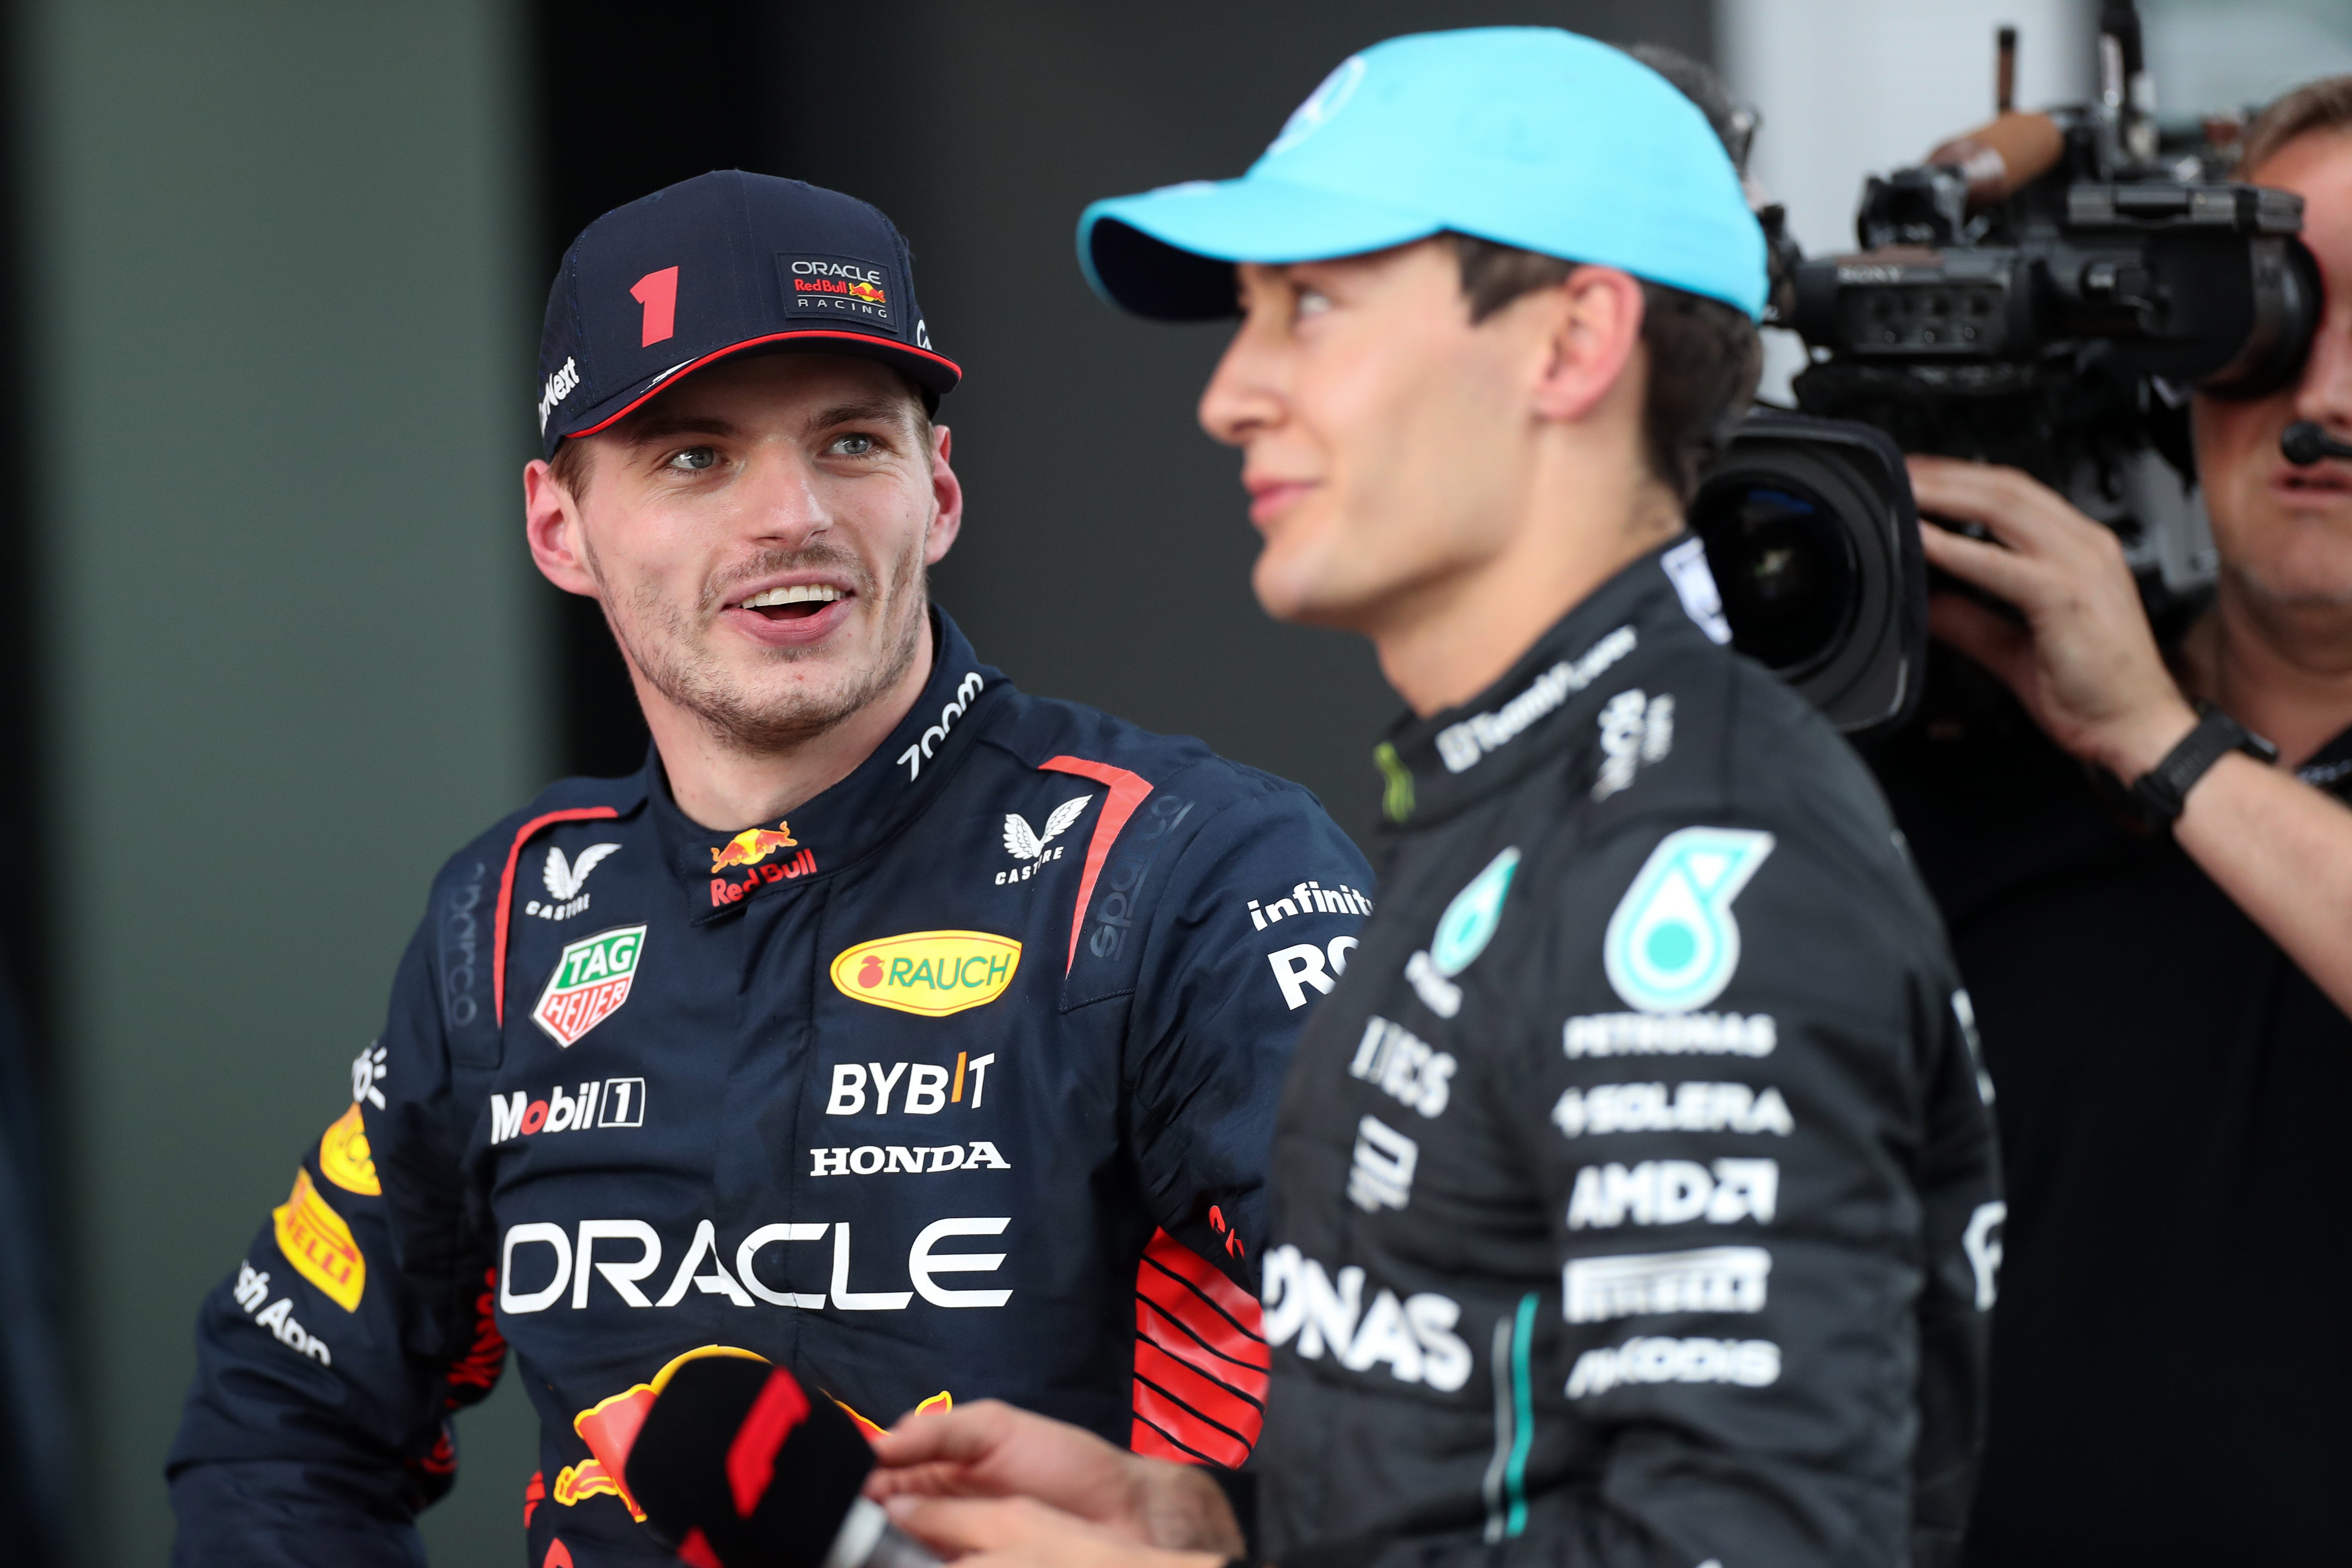 George Russell says Mercedes should try and sign Max Verstappen if the chance presents itself